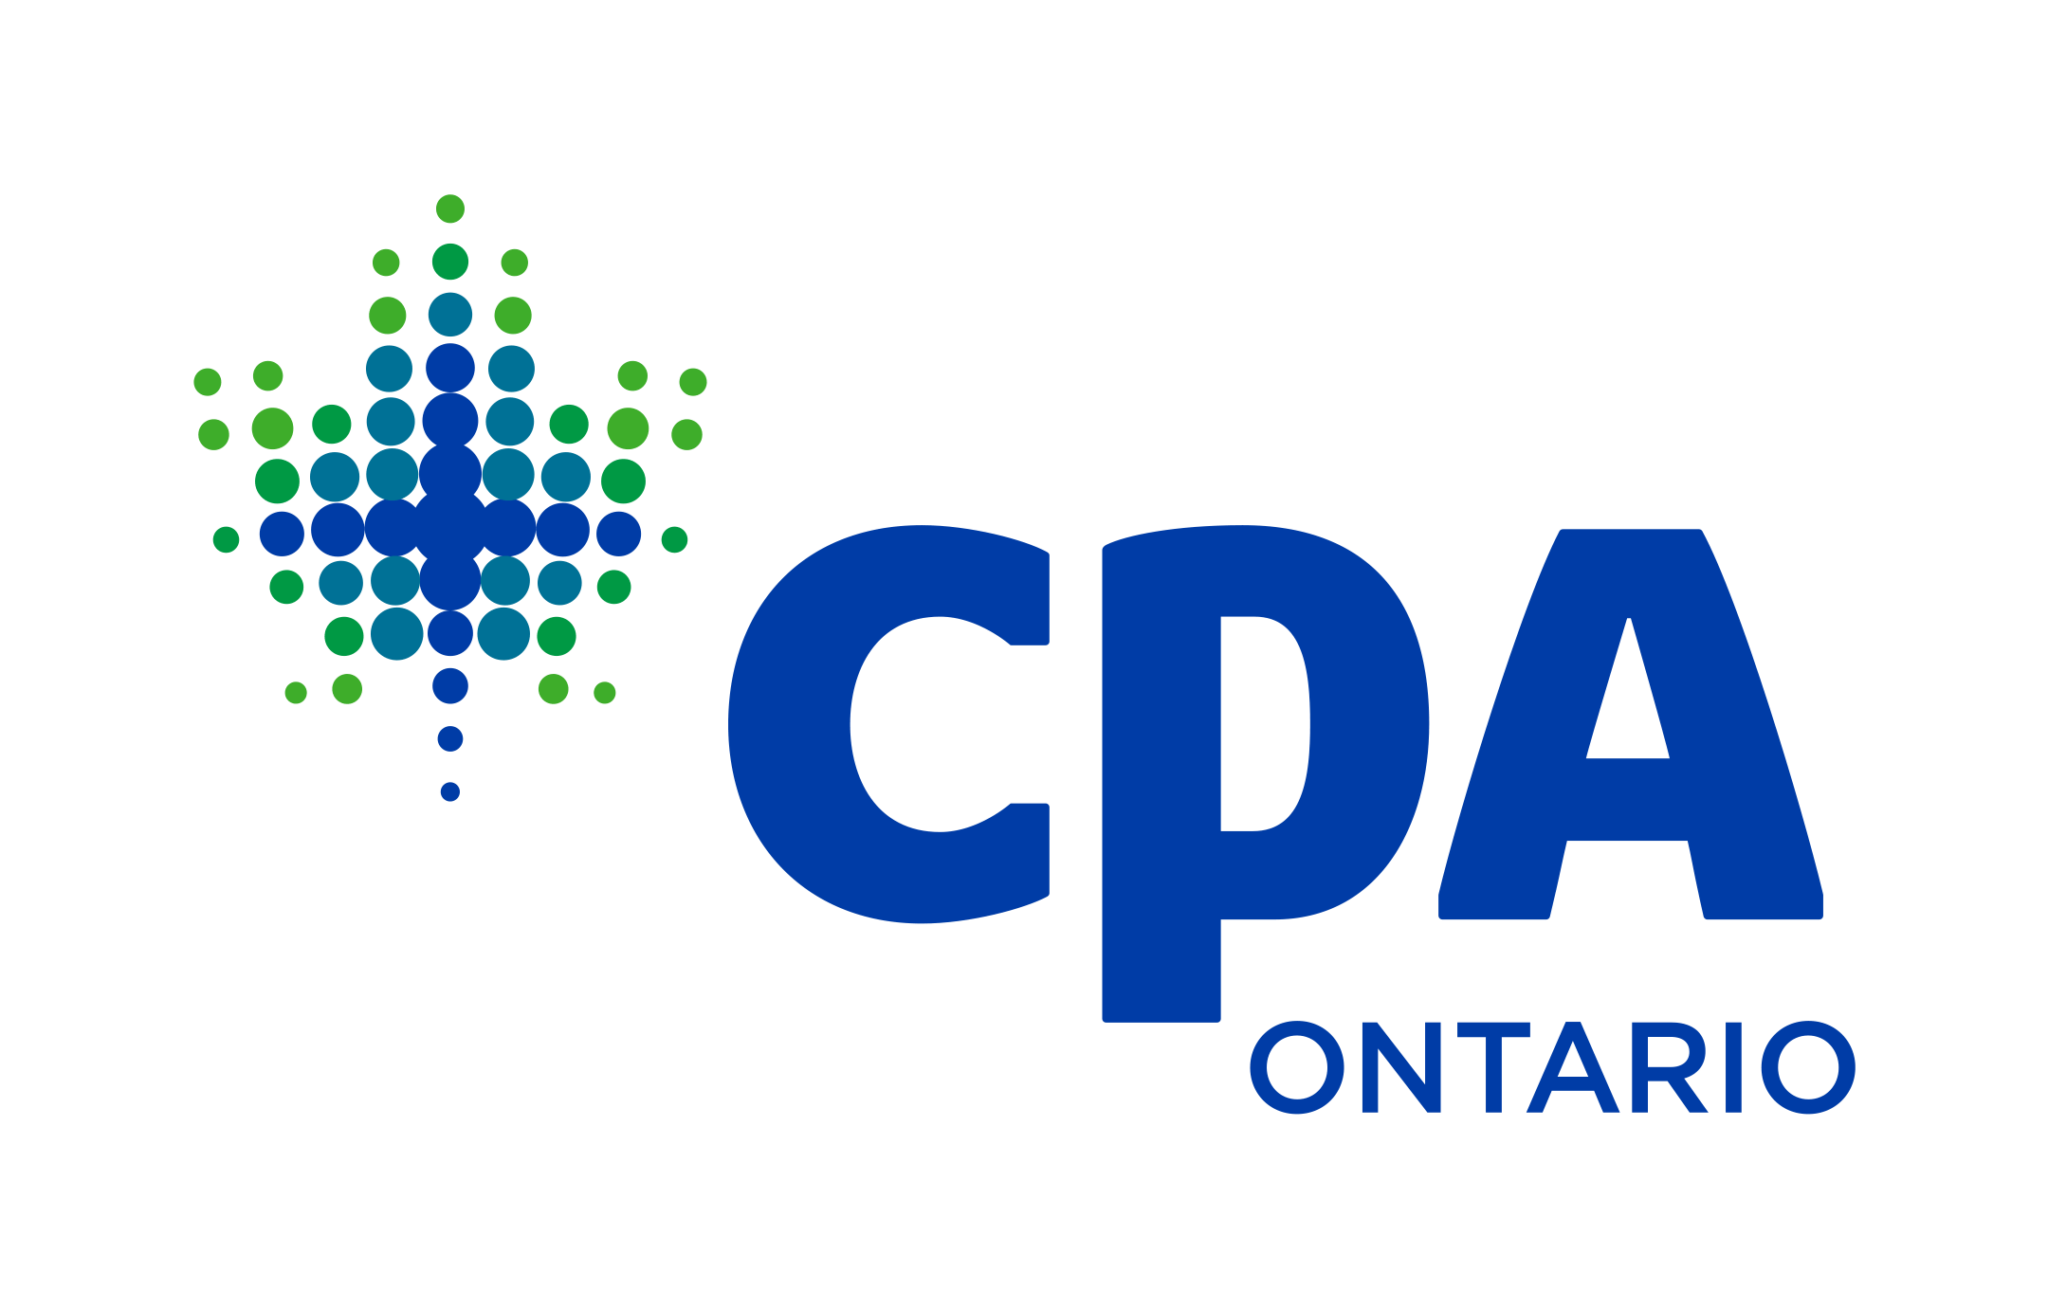 cpa ontario official logo for accounting professionals